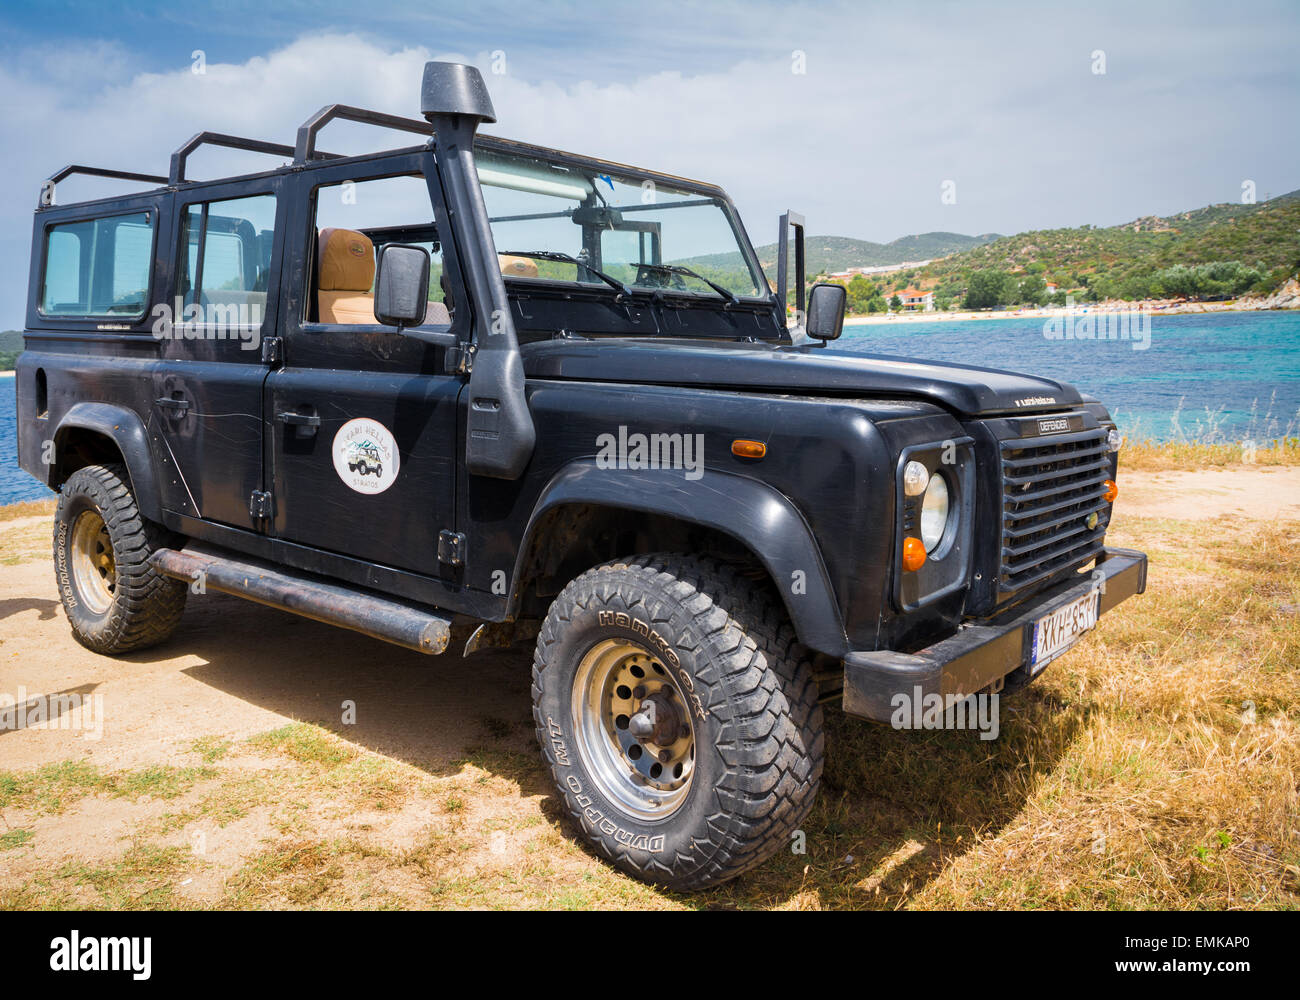 Landrover Land Rover Blue Old High Resolution Stock Photography and Images  - Alamy